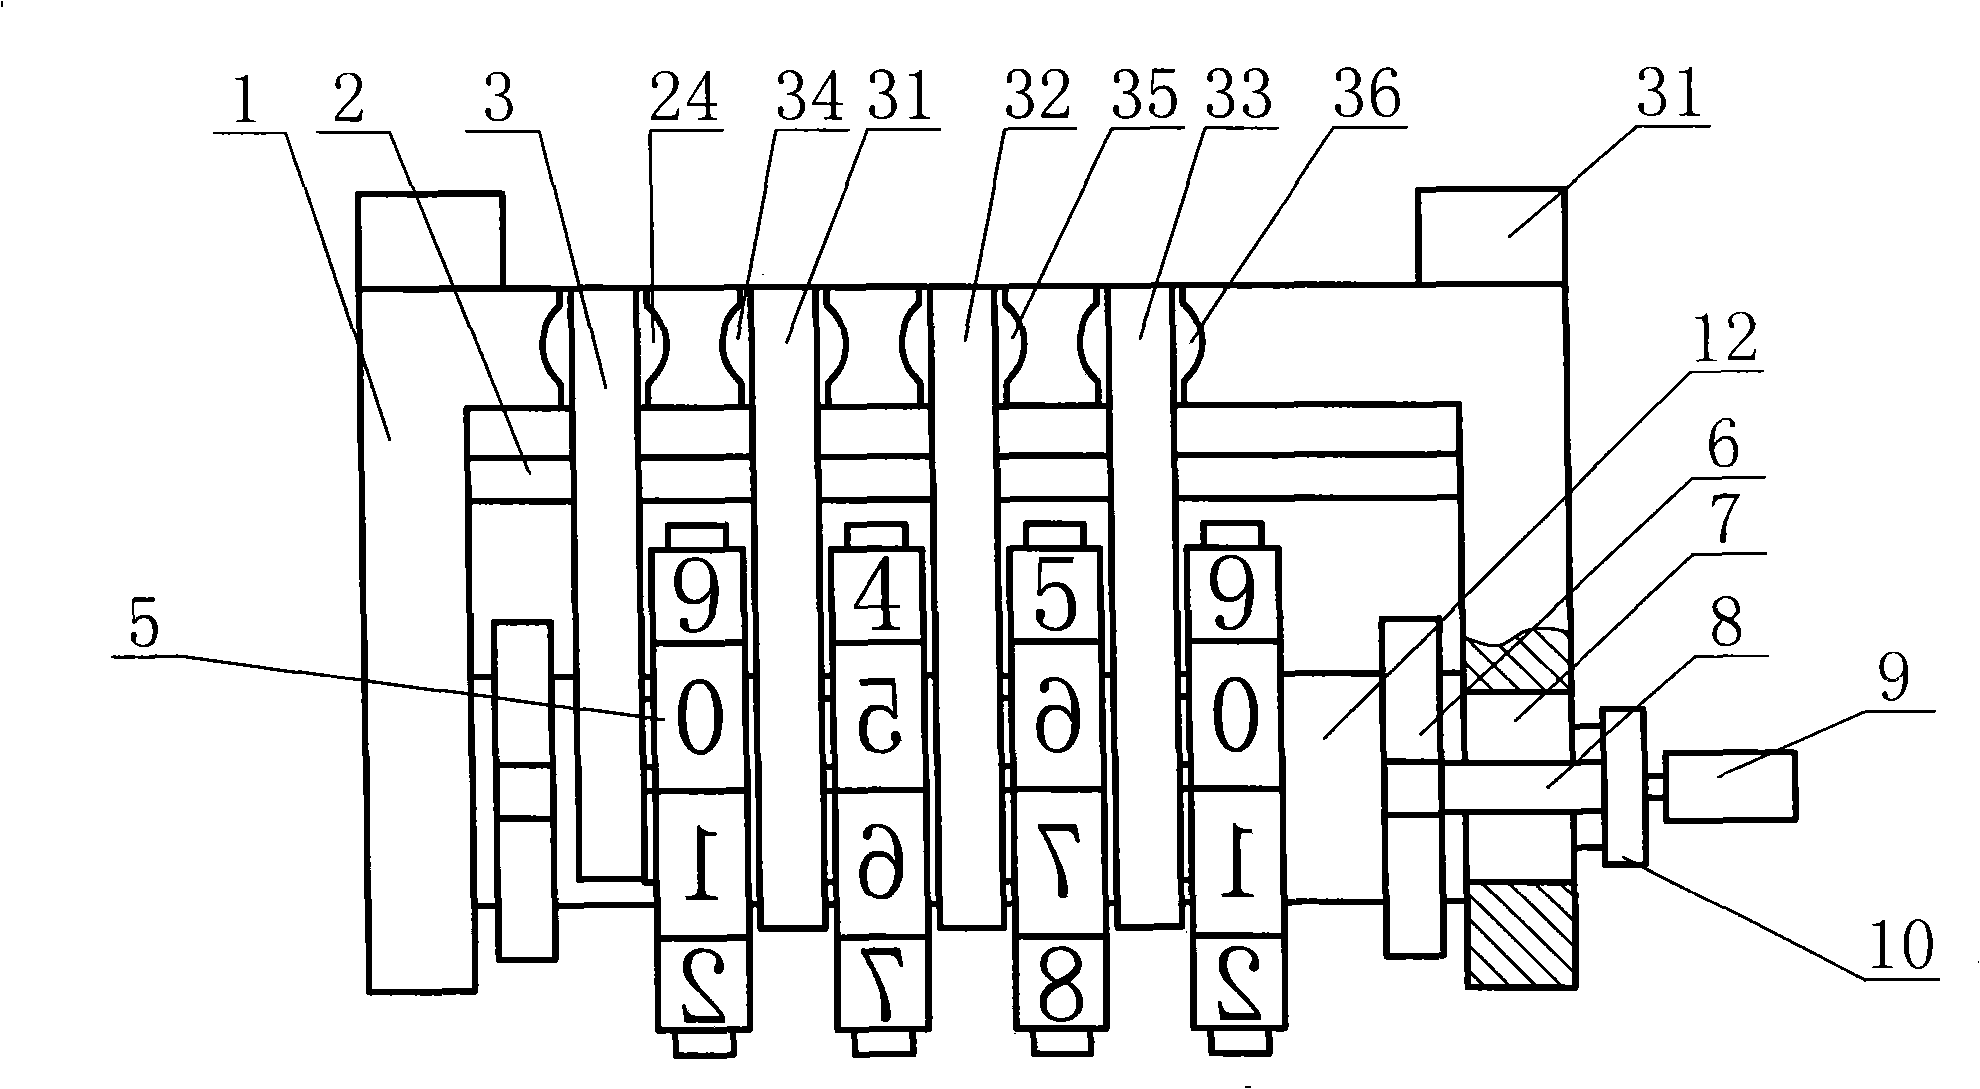 Numbering device